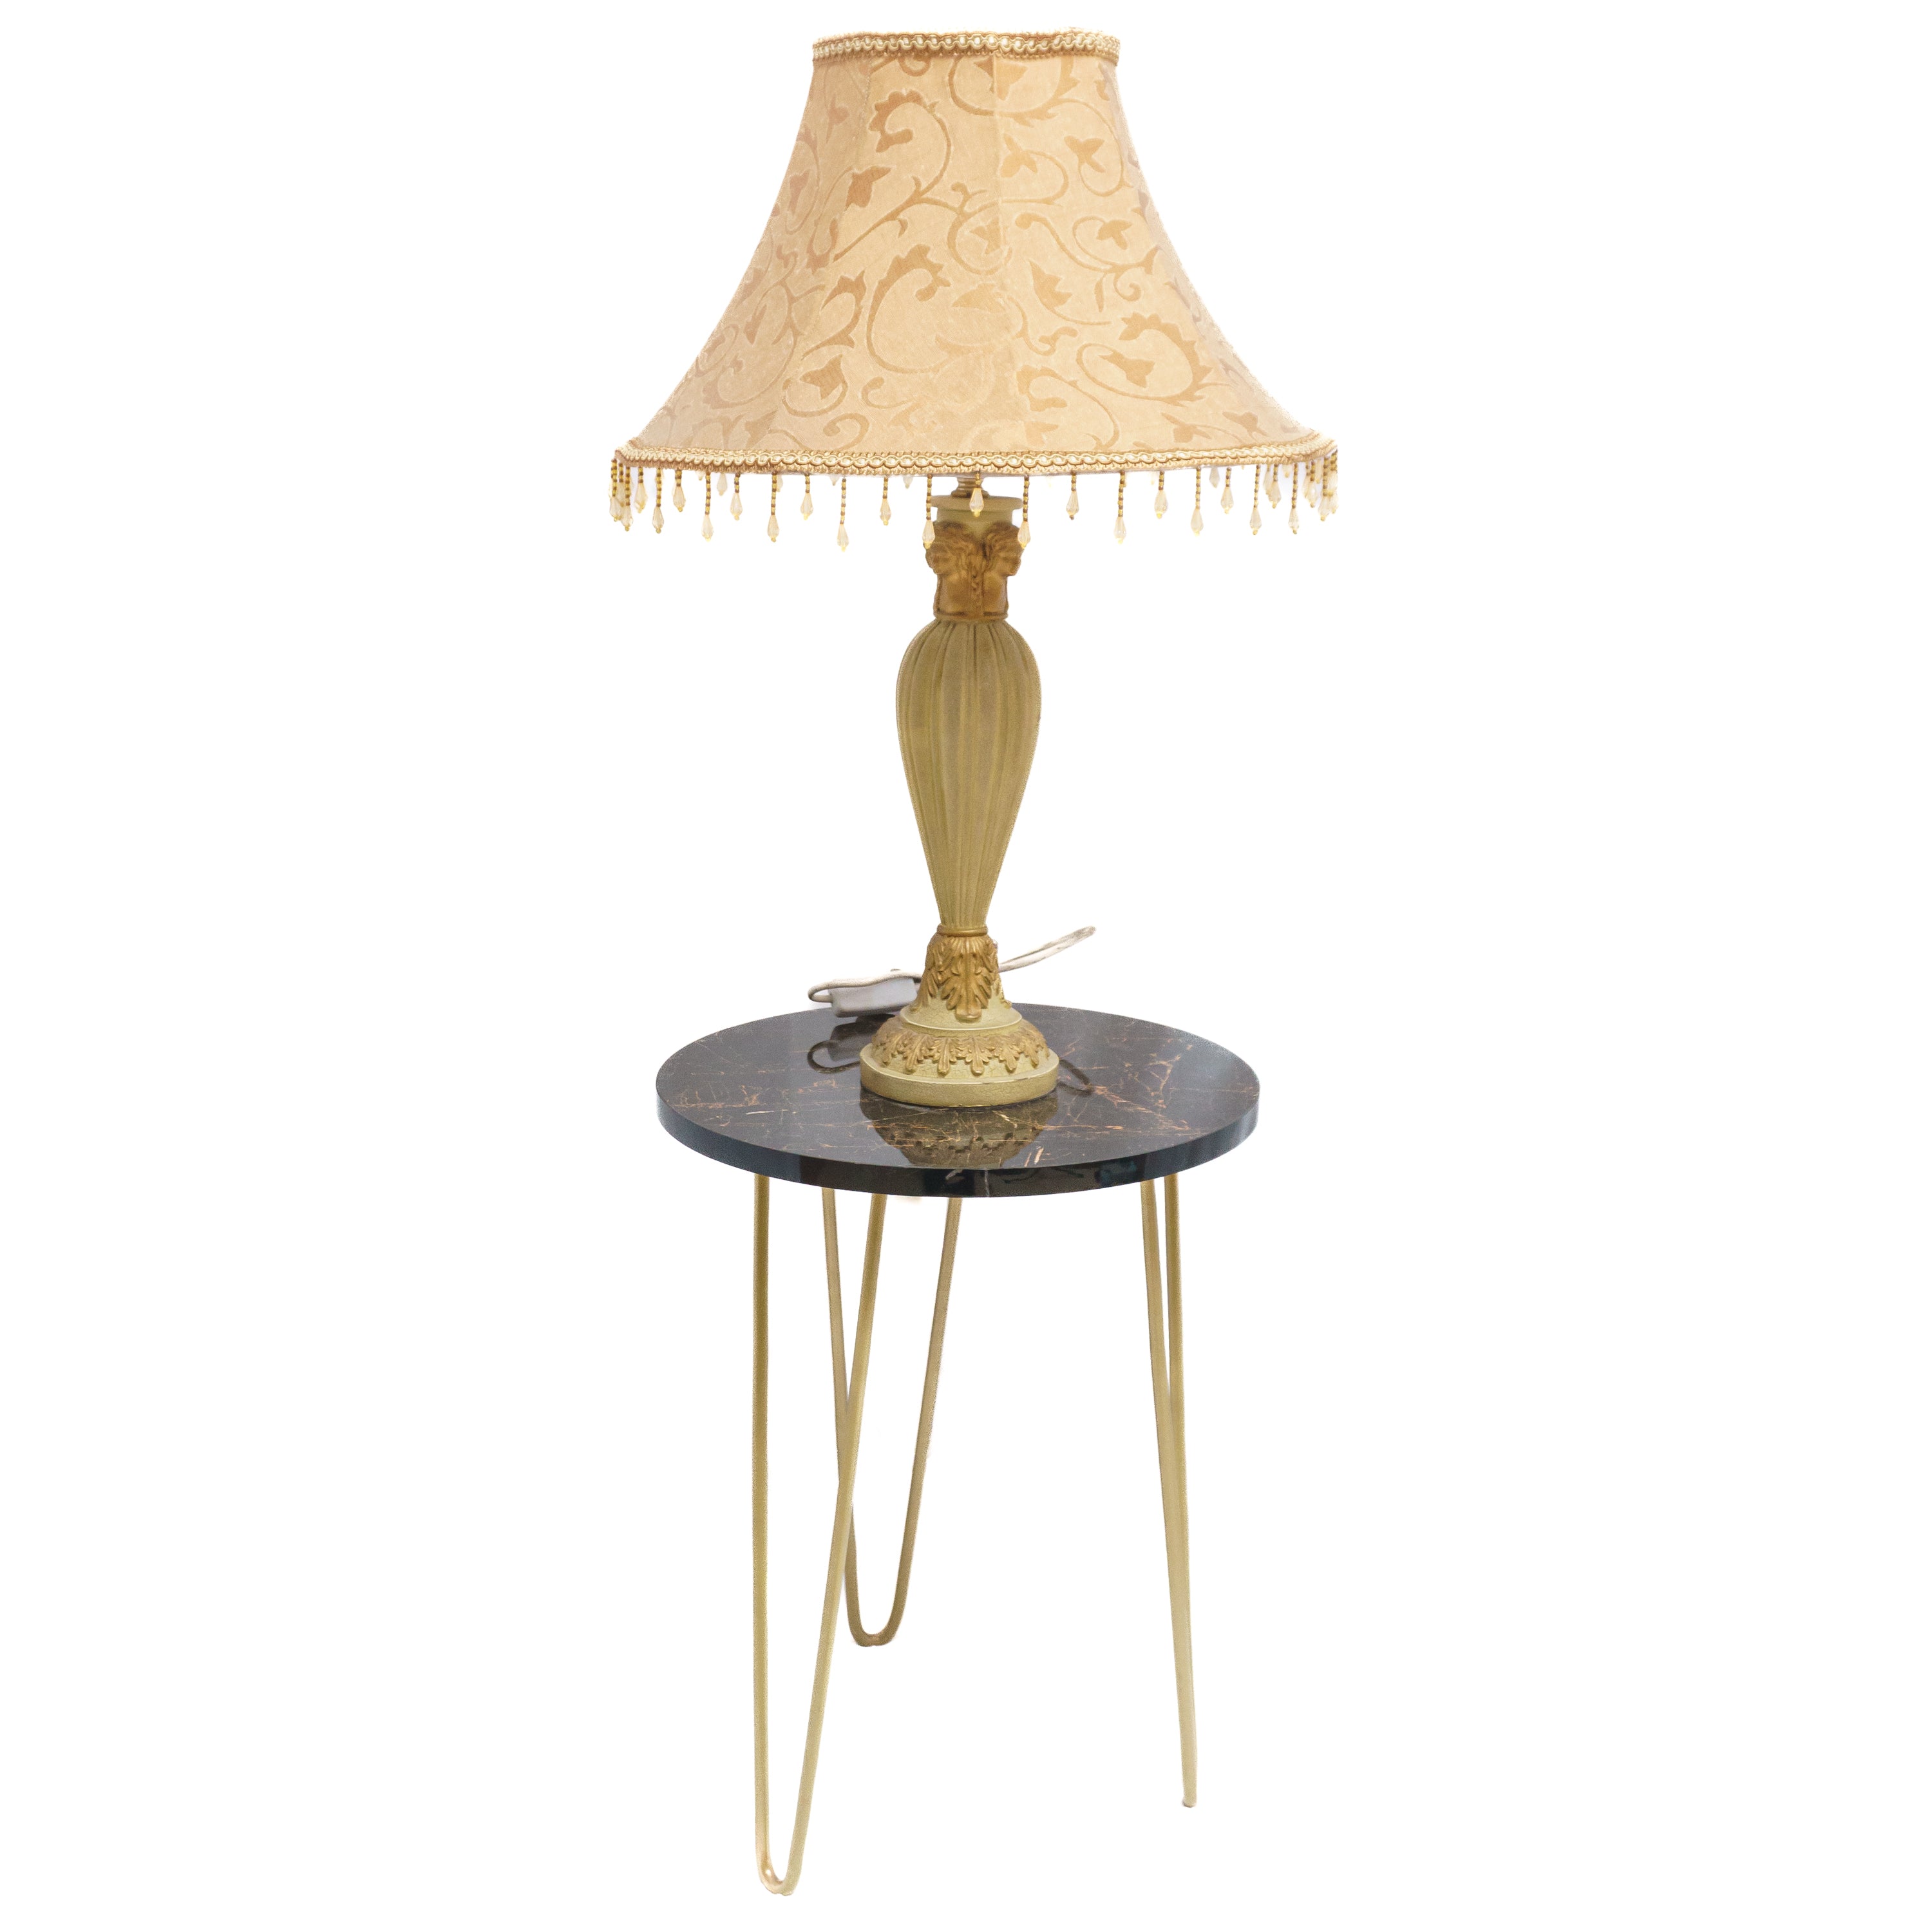 Floral Elegance Electric Lamp: Beige Fabric Shade and Base with Matching Lamp Stand